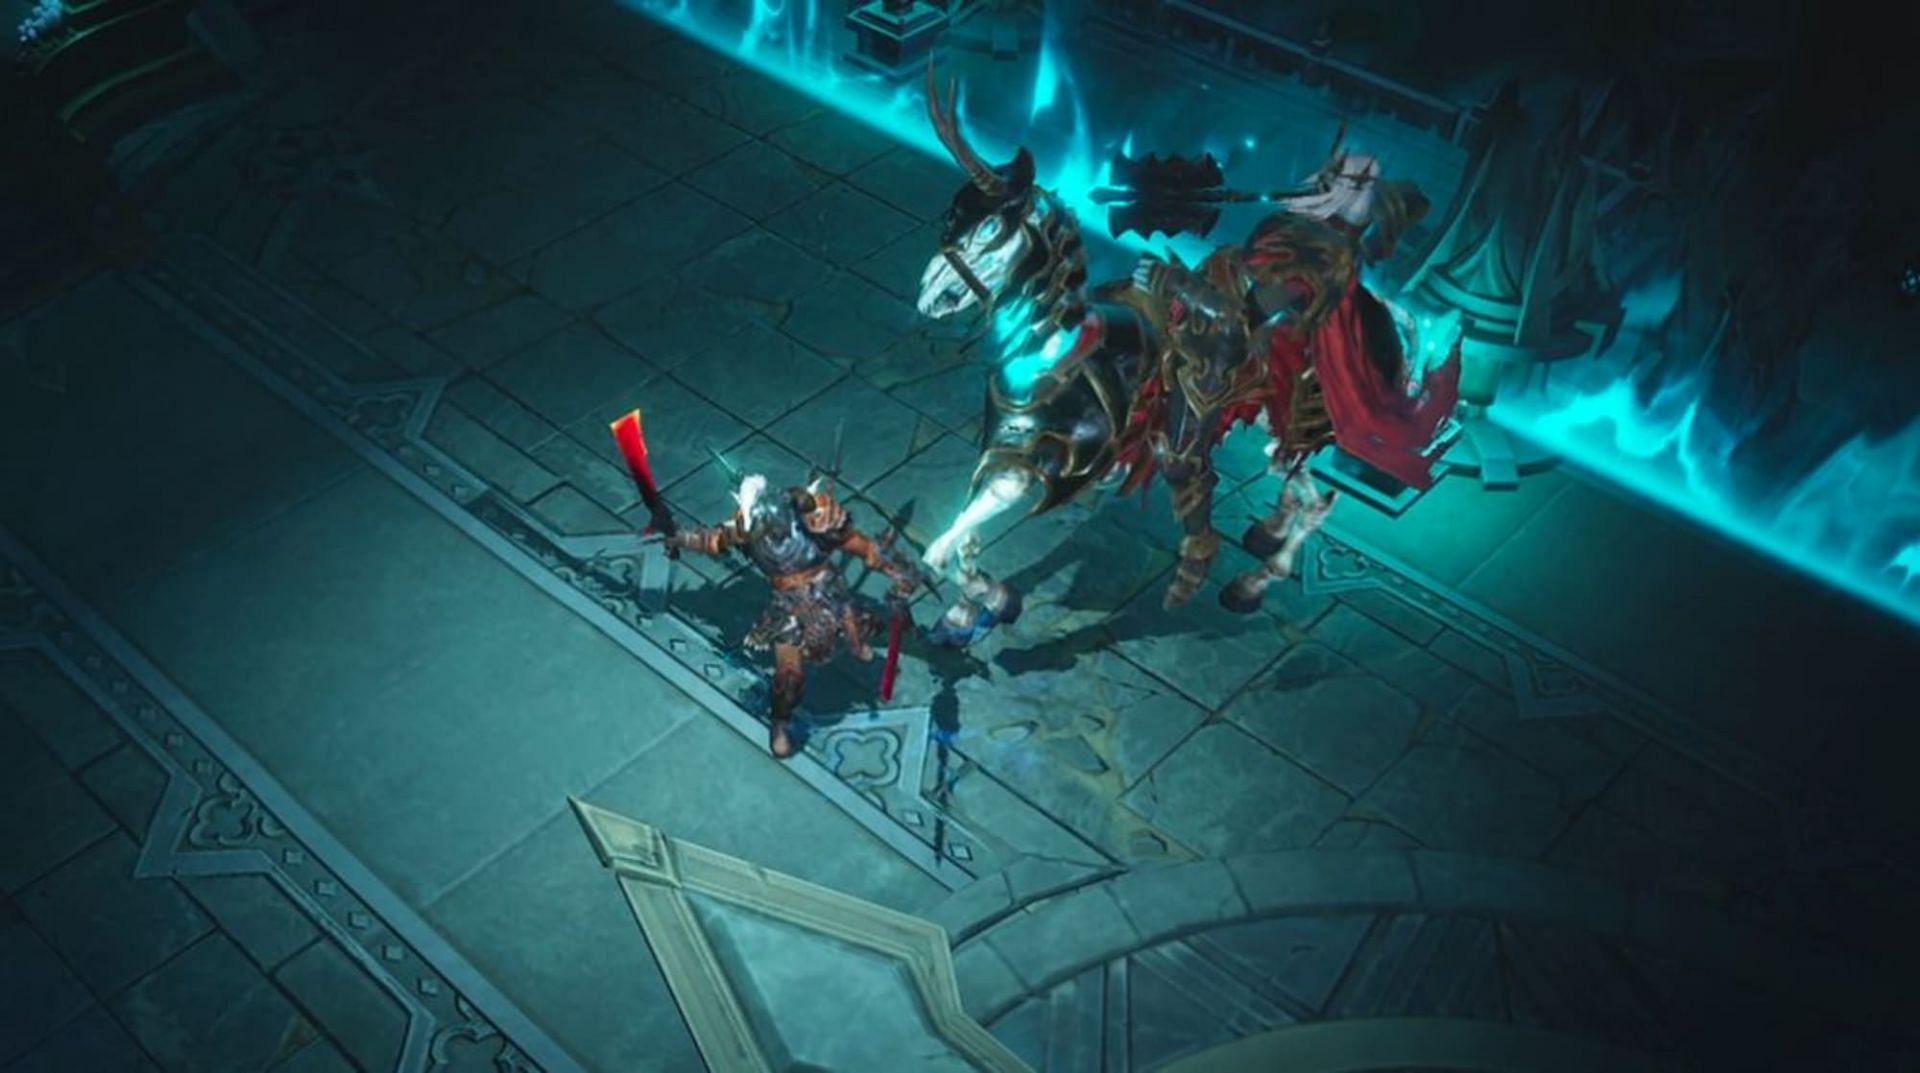 The Crusader has skills that support itself and its allies (Image via Blizzard Entertainment)